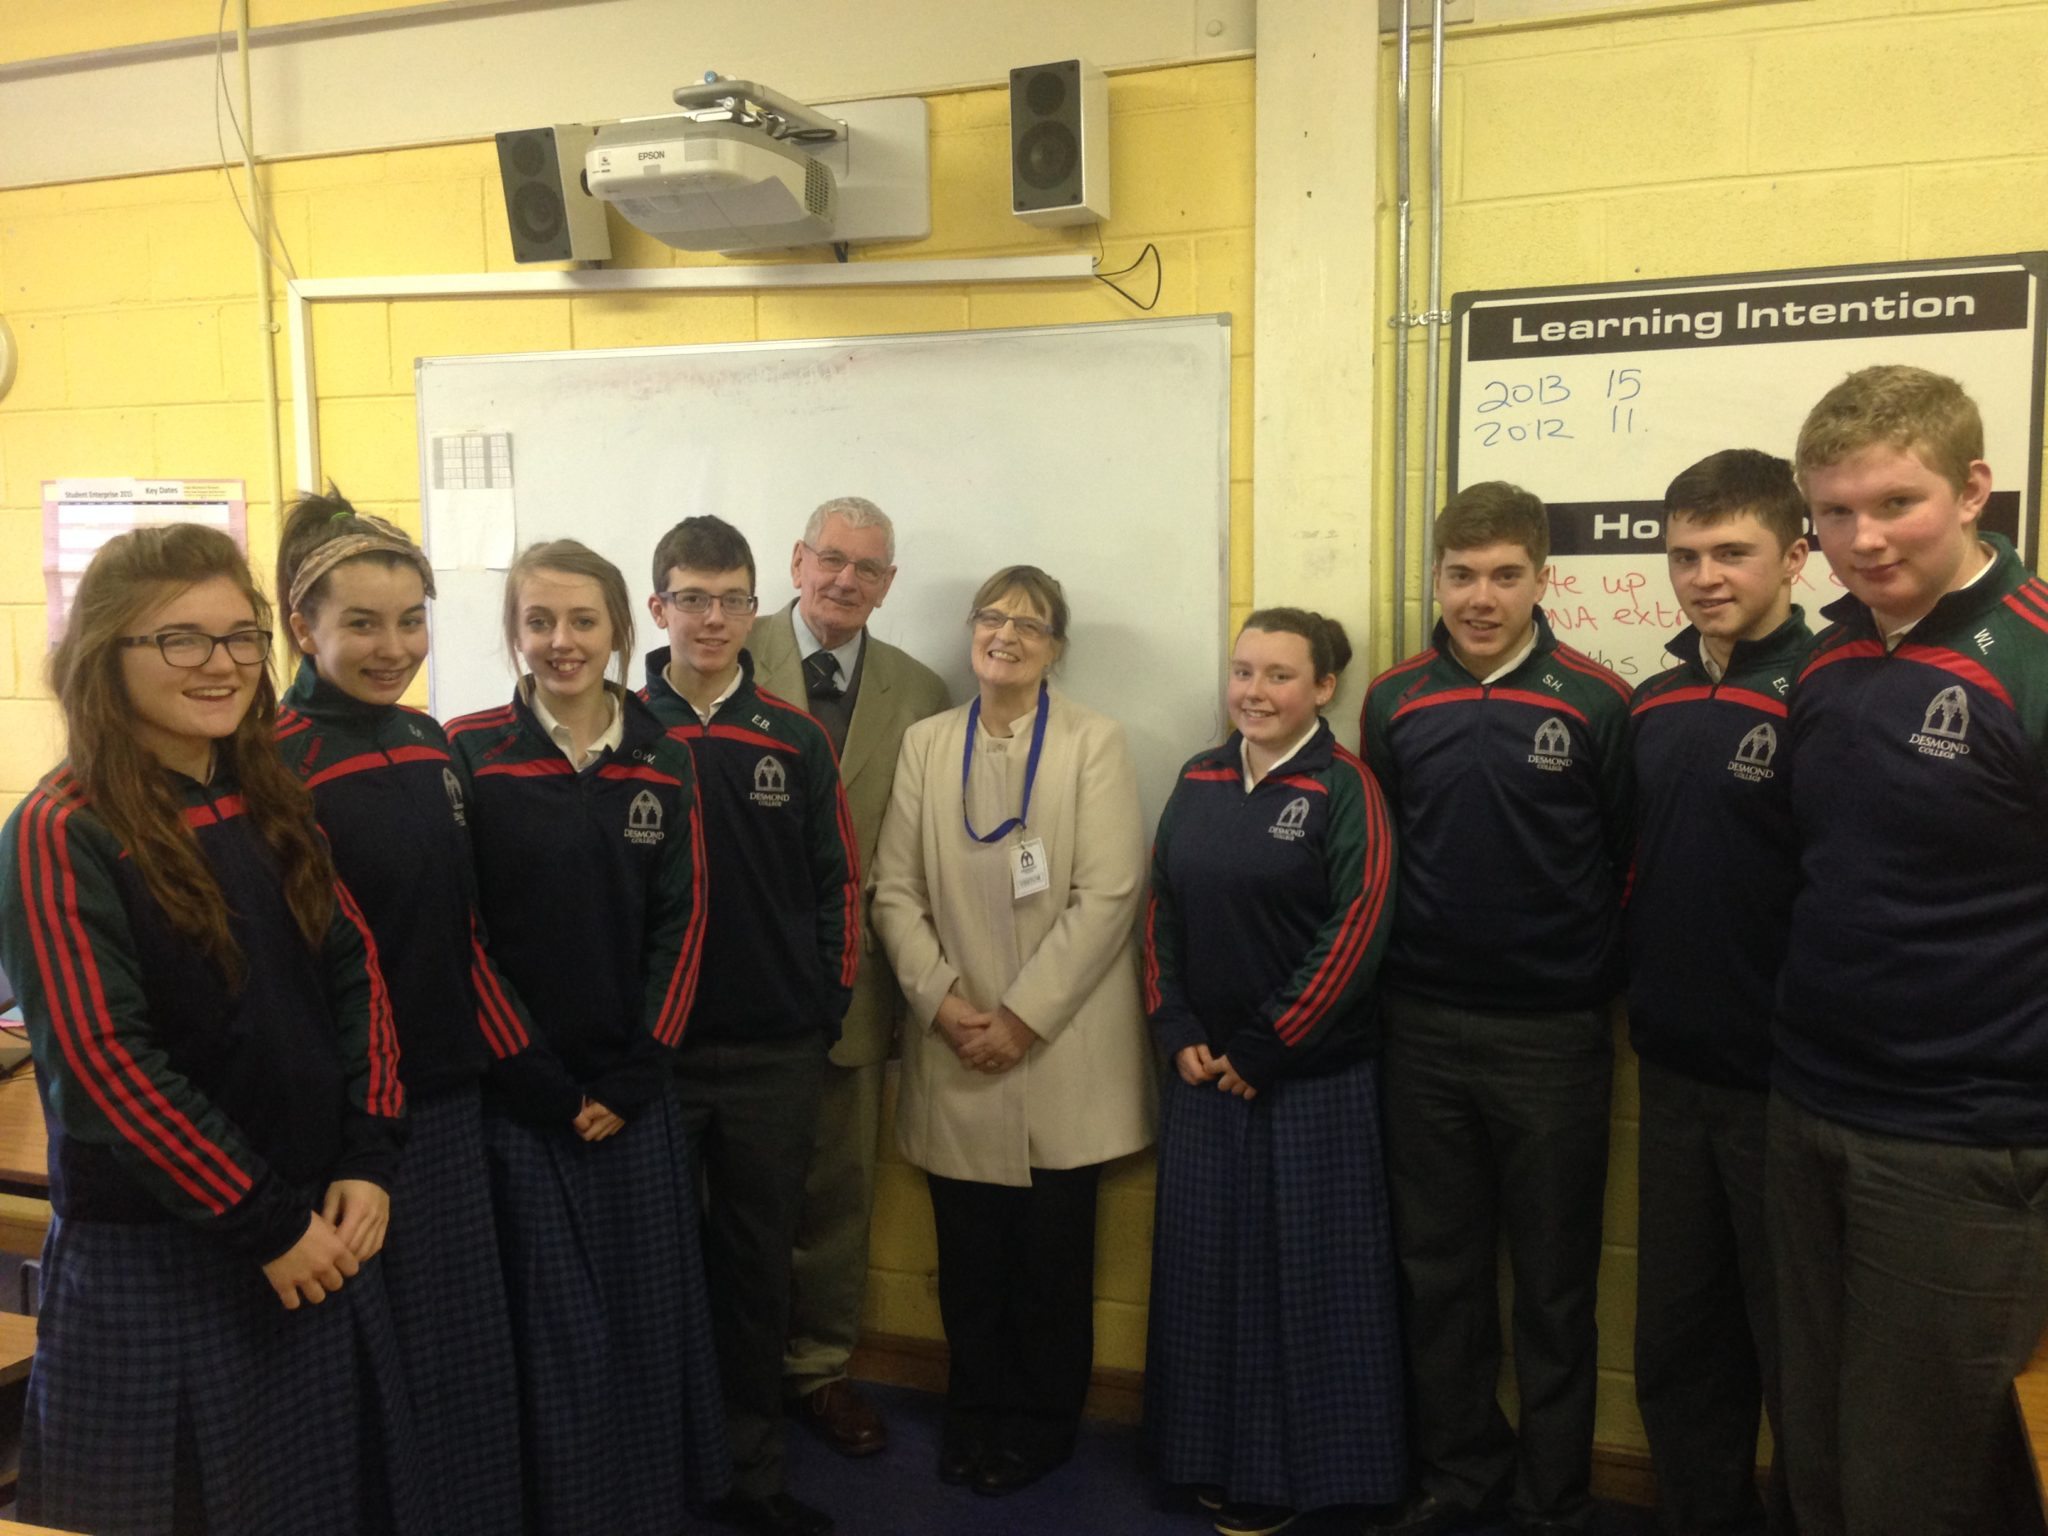 Dr Denis Sexton from the Irish Society for Autism with Claire Mortell, Stacey Flynn, Orla Wren, Eamonn Browne, Patreeze Nugent, Seamus Hurley, Eoin Considine and William Lane, Transition Year students at Desmond College